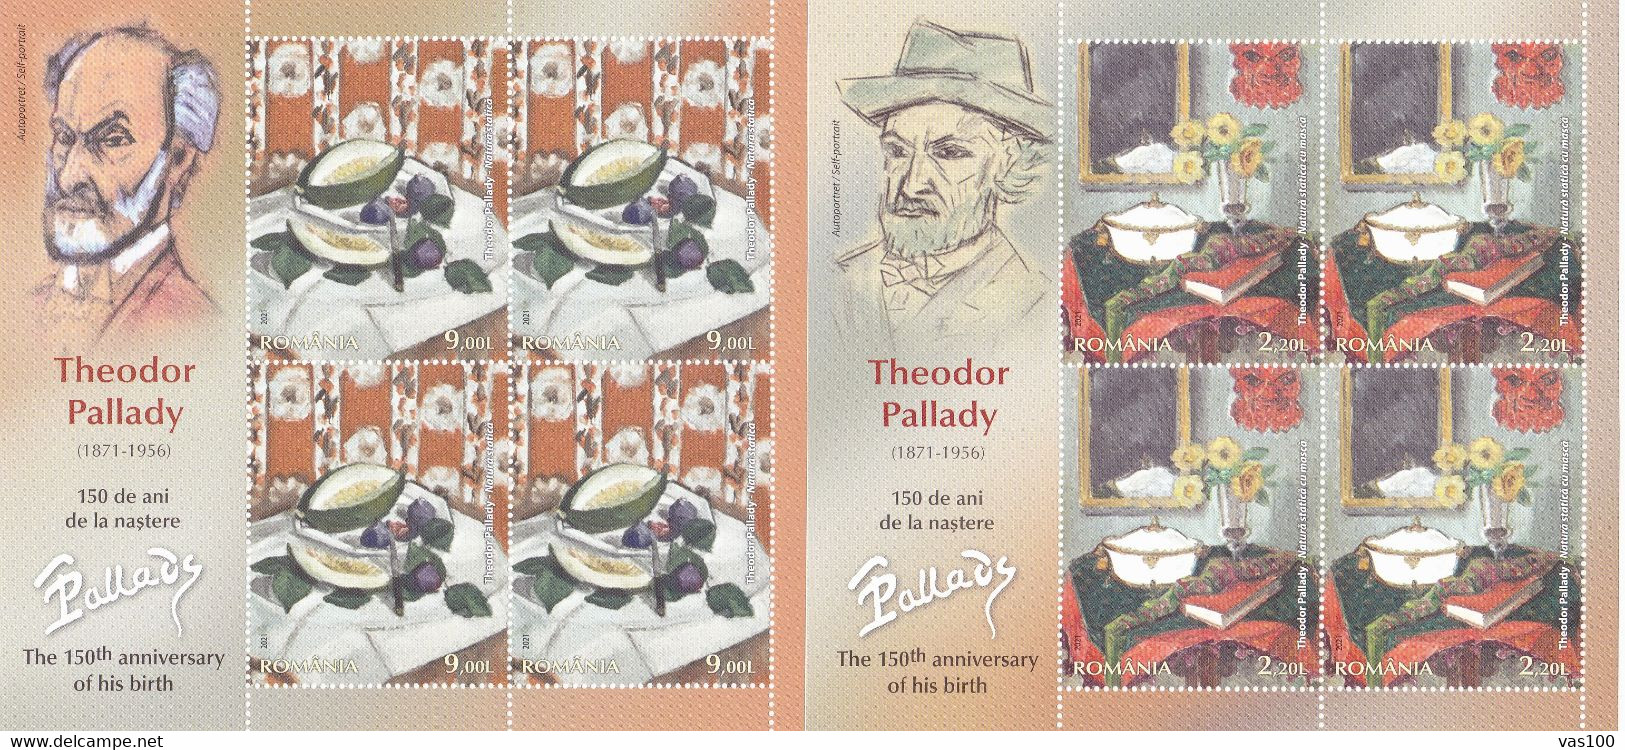 ROMANIA 2021 Painter THEODOR PALLADY The150th Anniversary Of His Birth Set 4 MINISHEET MNH** - Feuilles Complètes Et Multiples